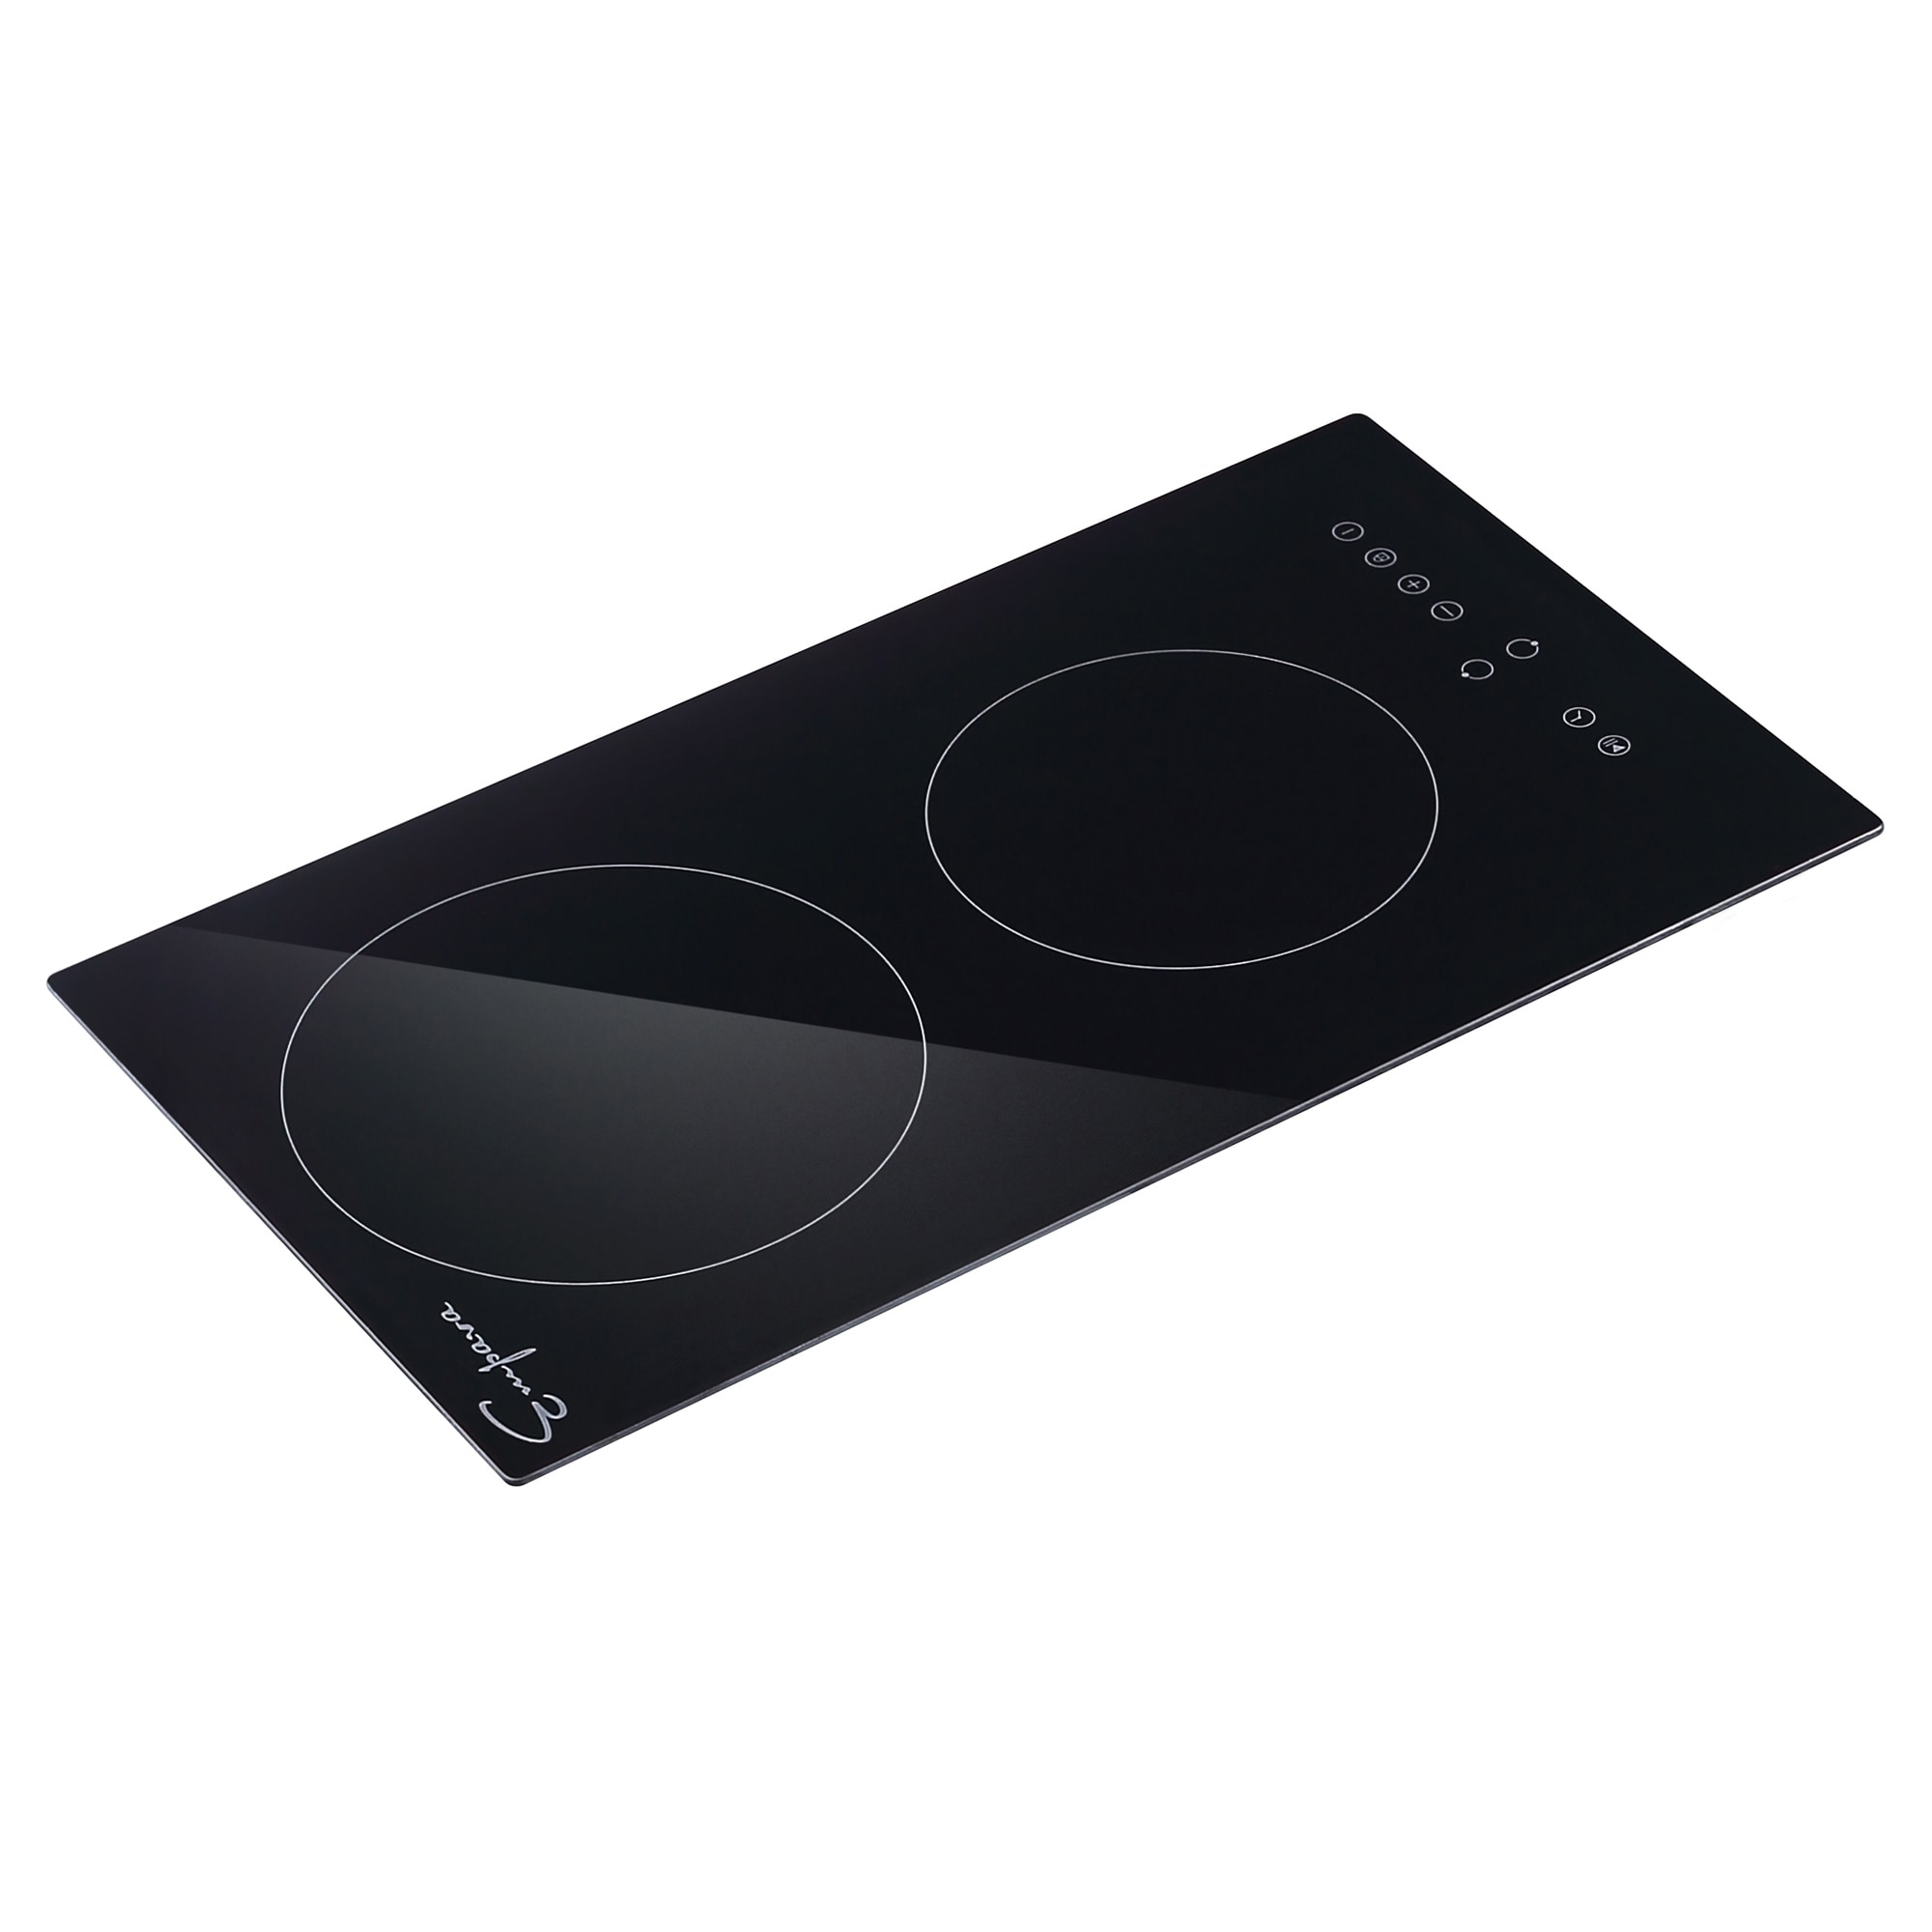 Empava Built-in 36 in. 240V Electric Stove Smooth Surface Cooktop in Black  with 5 Elements EPV-36EC01 - The Home Depot